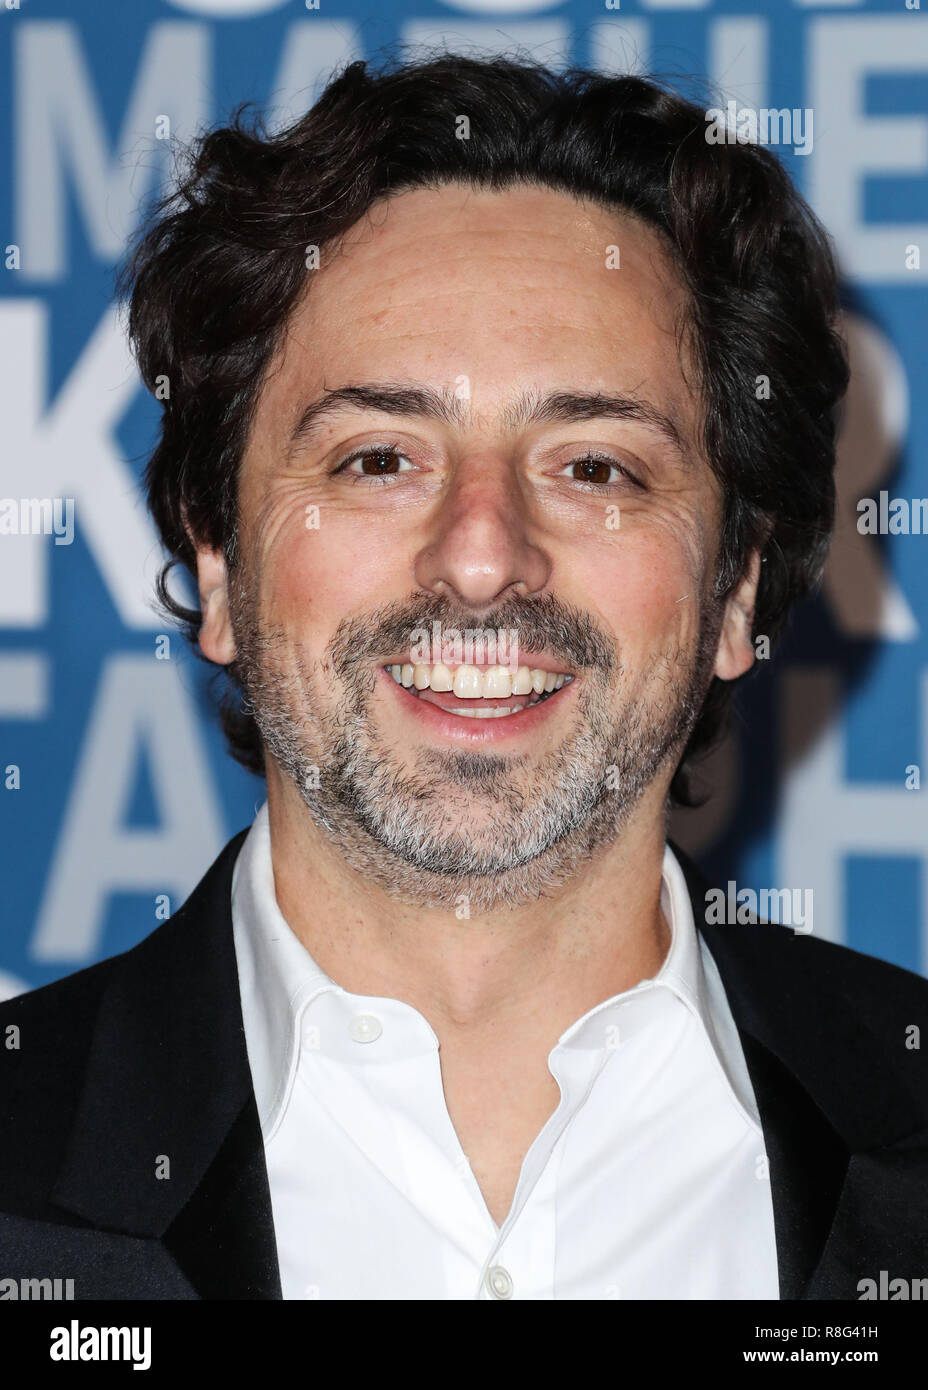 MOUNTAIN VIEW, CA, USA - DECEMBER 03: Sergey Brin at the 2018 Breakthrough Prize Ceremony held at the NASA Ames Research Center on December 3, 2017 in Mountain View, California, United States. (Photo by Xavier Collin/Image Press Agency) Stock Photo